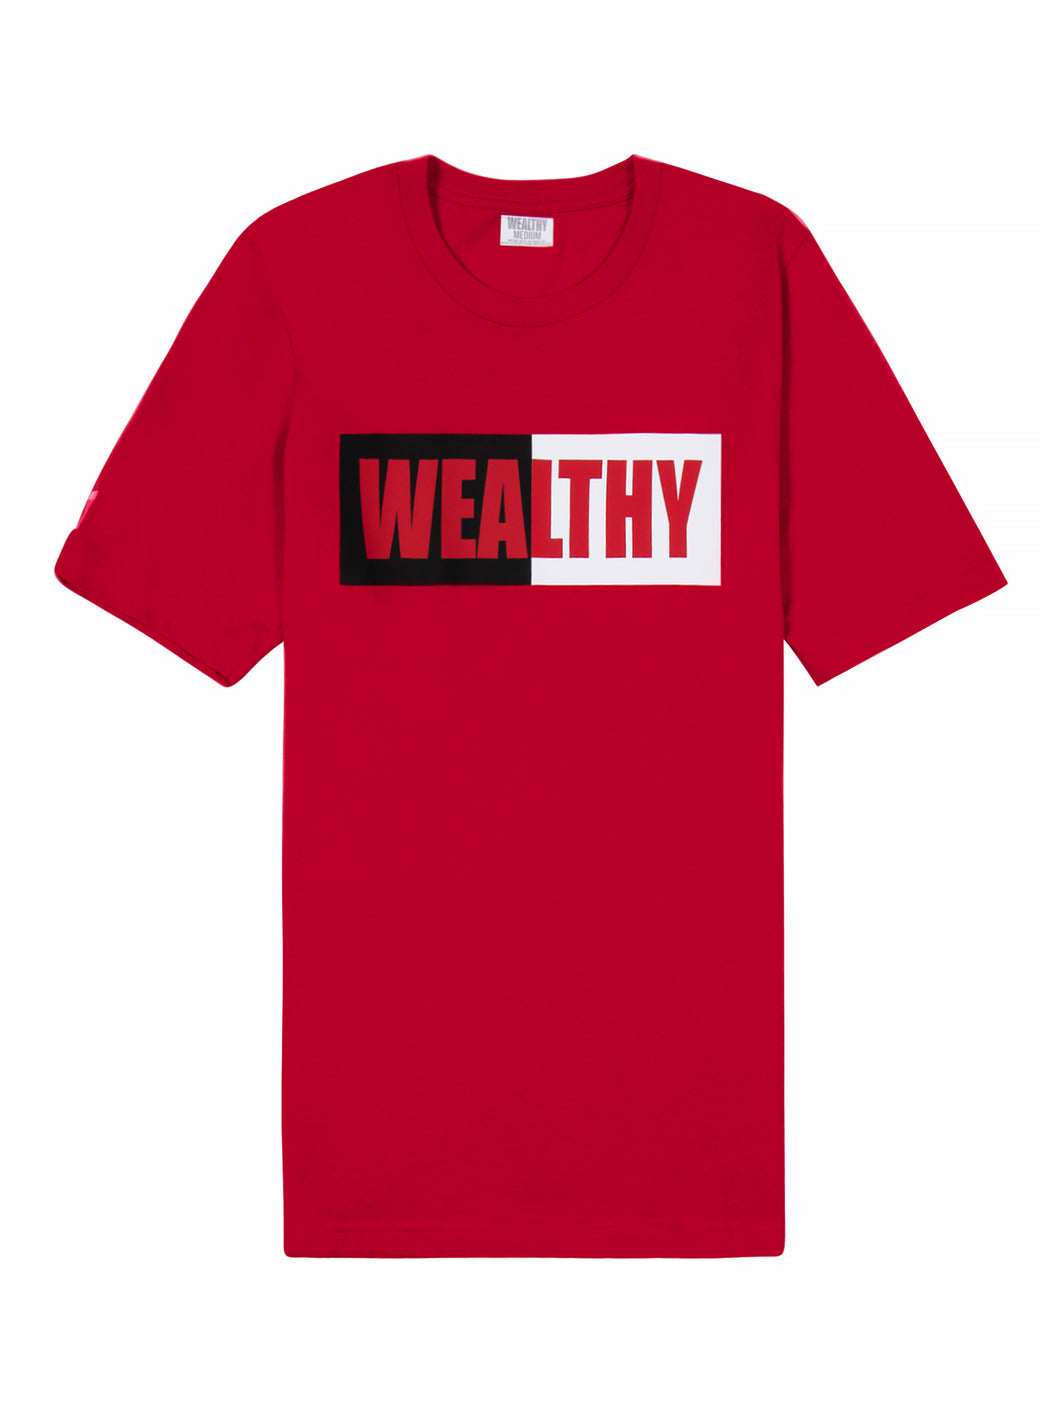 Wealthy Tee (Red/White/Black/Red)